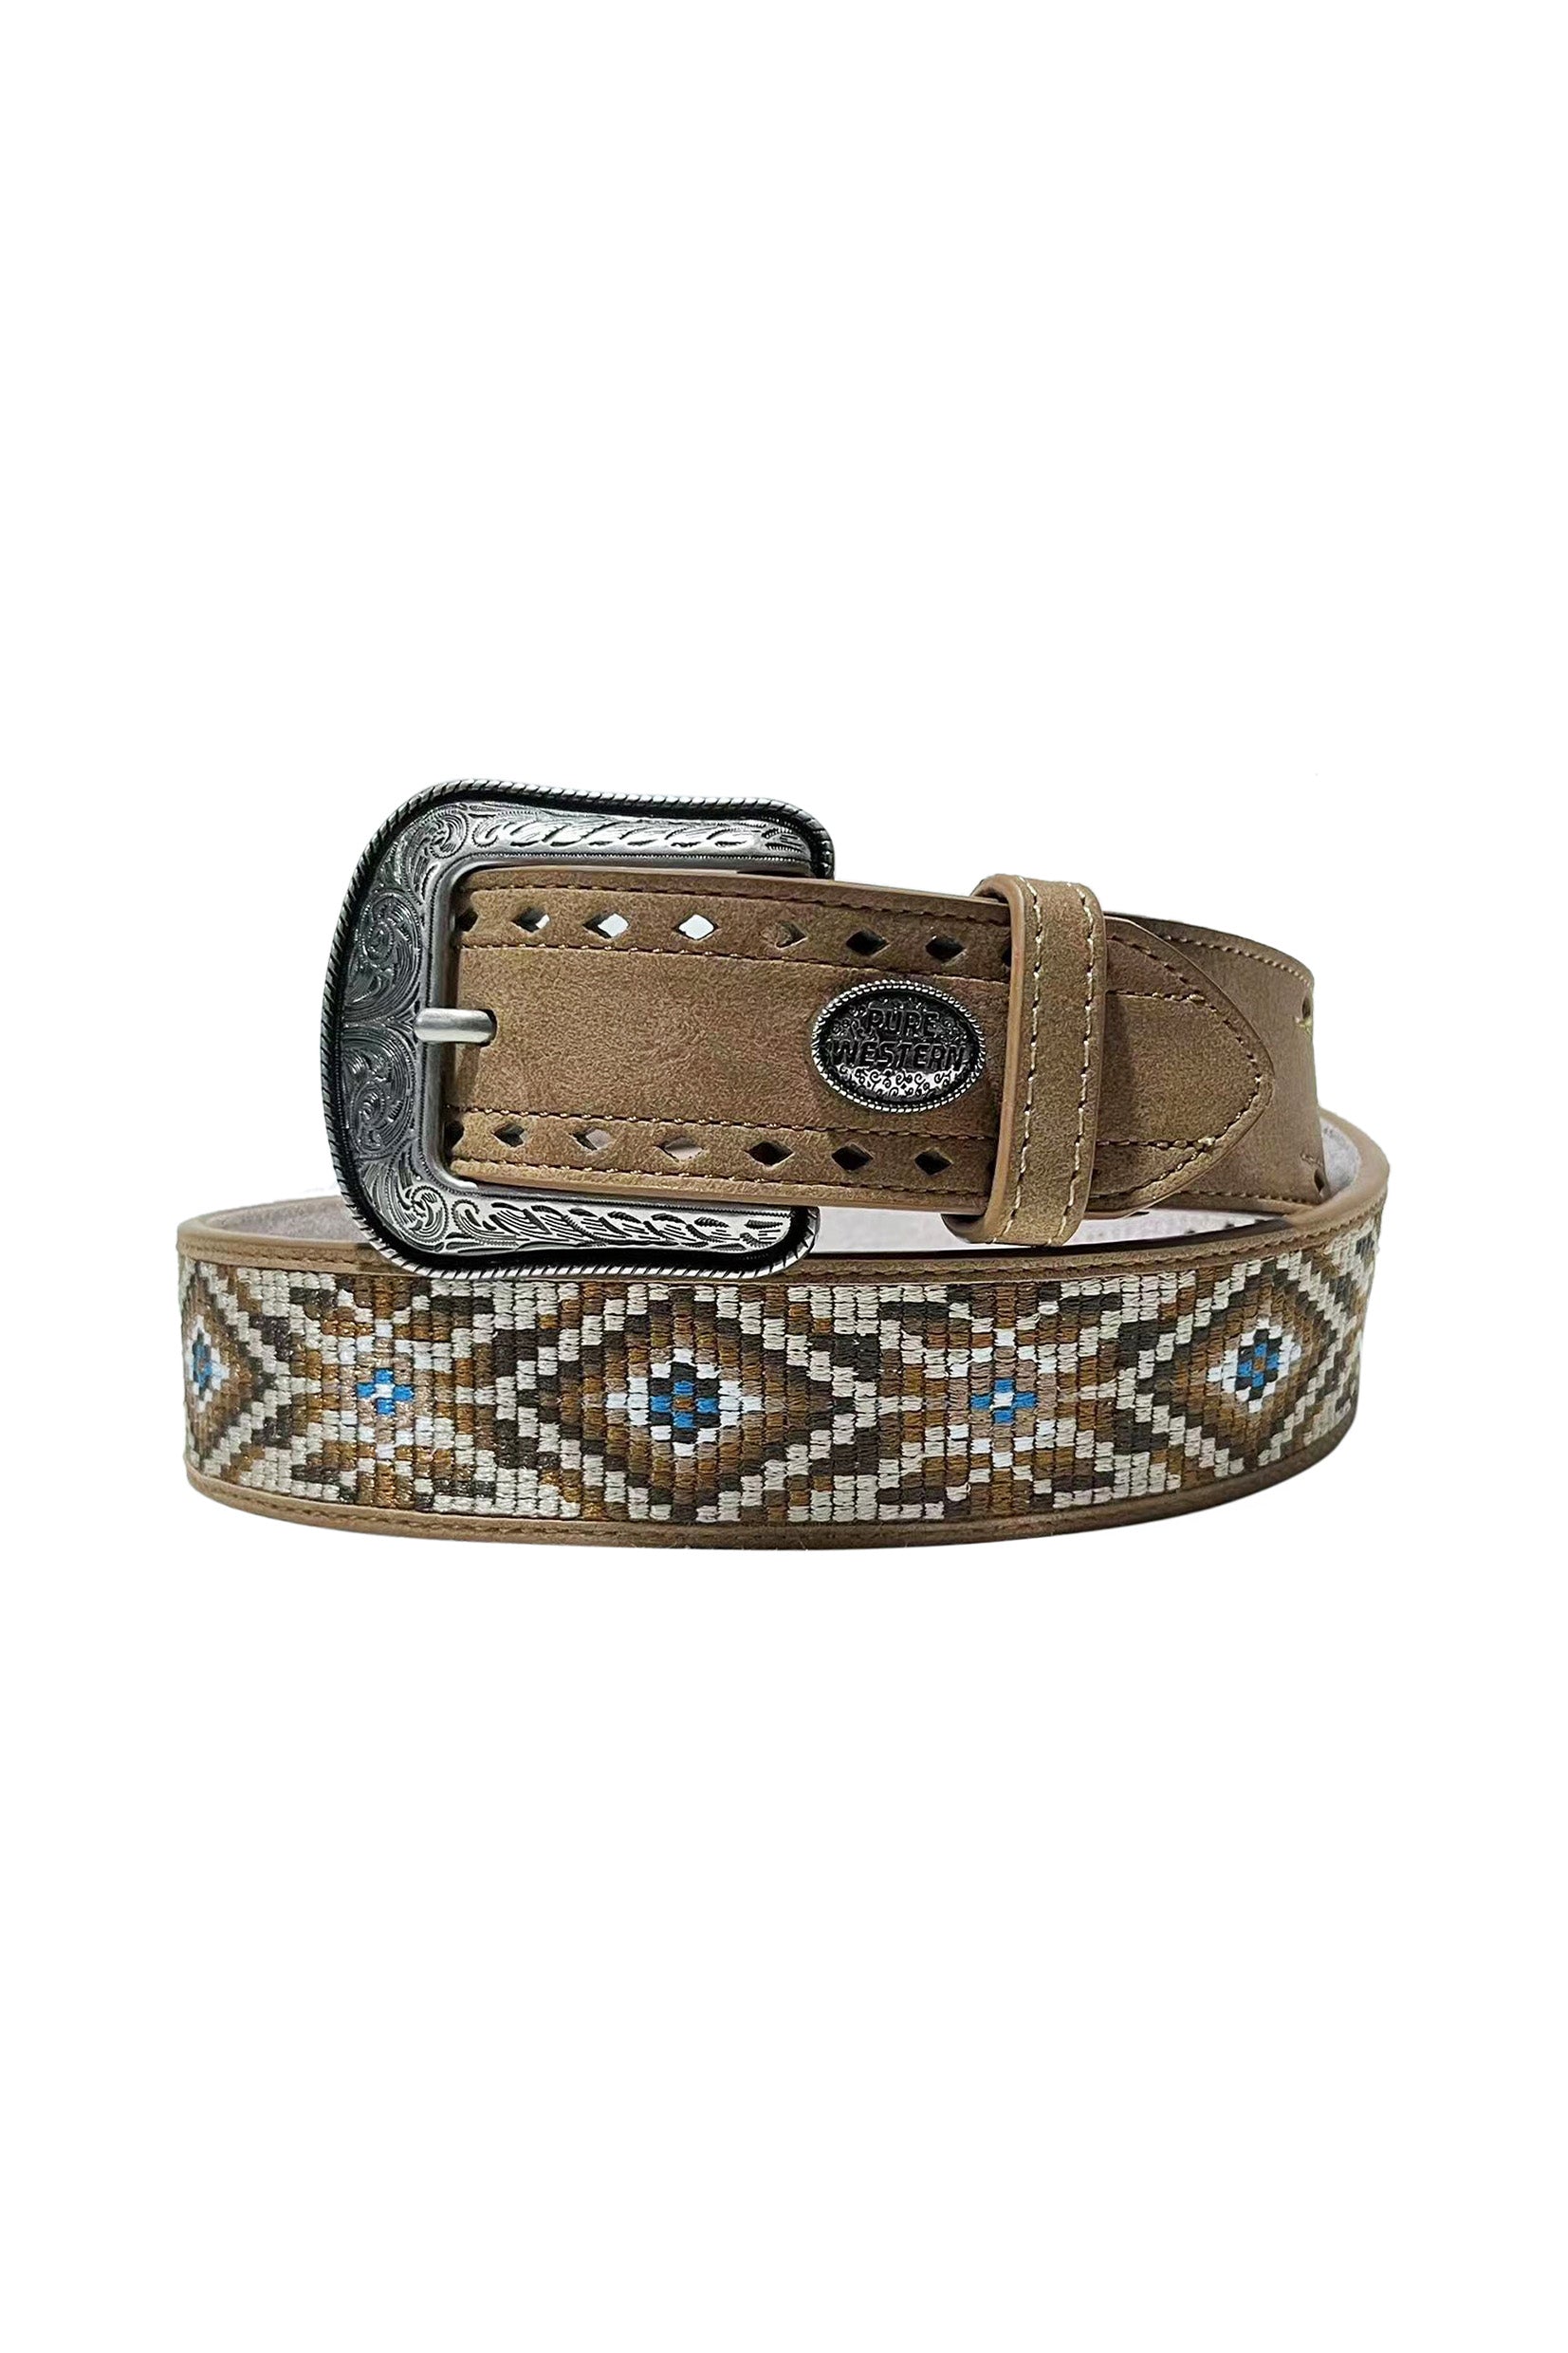 Pure Western Levine Belt - Summer Clearance